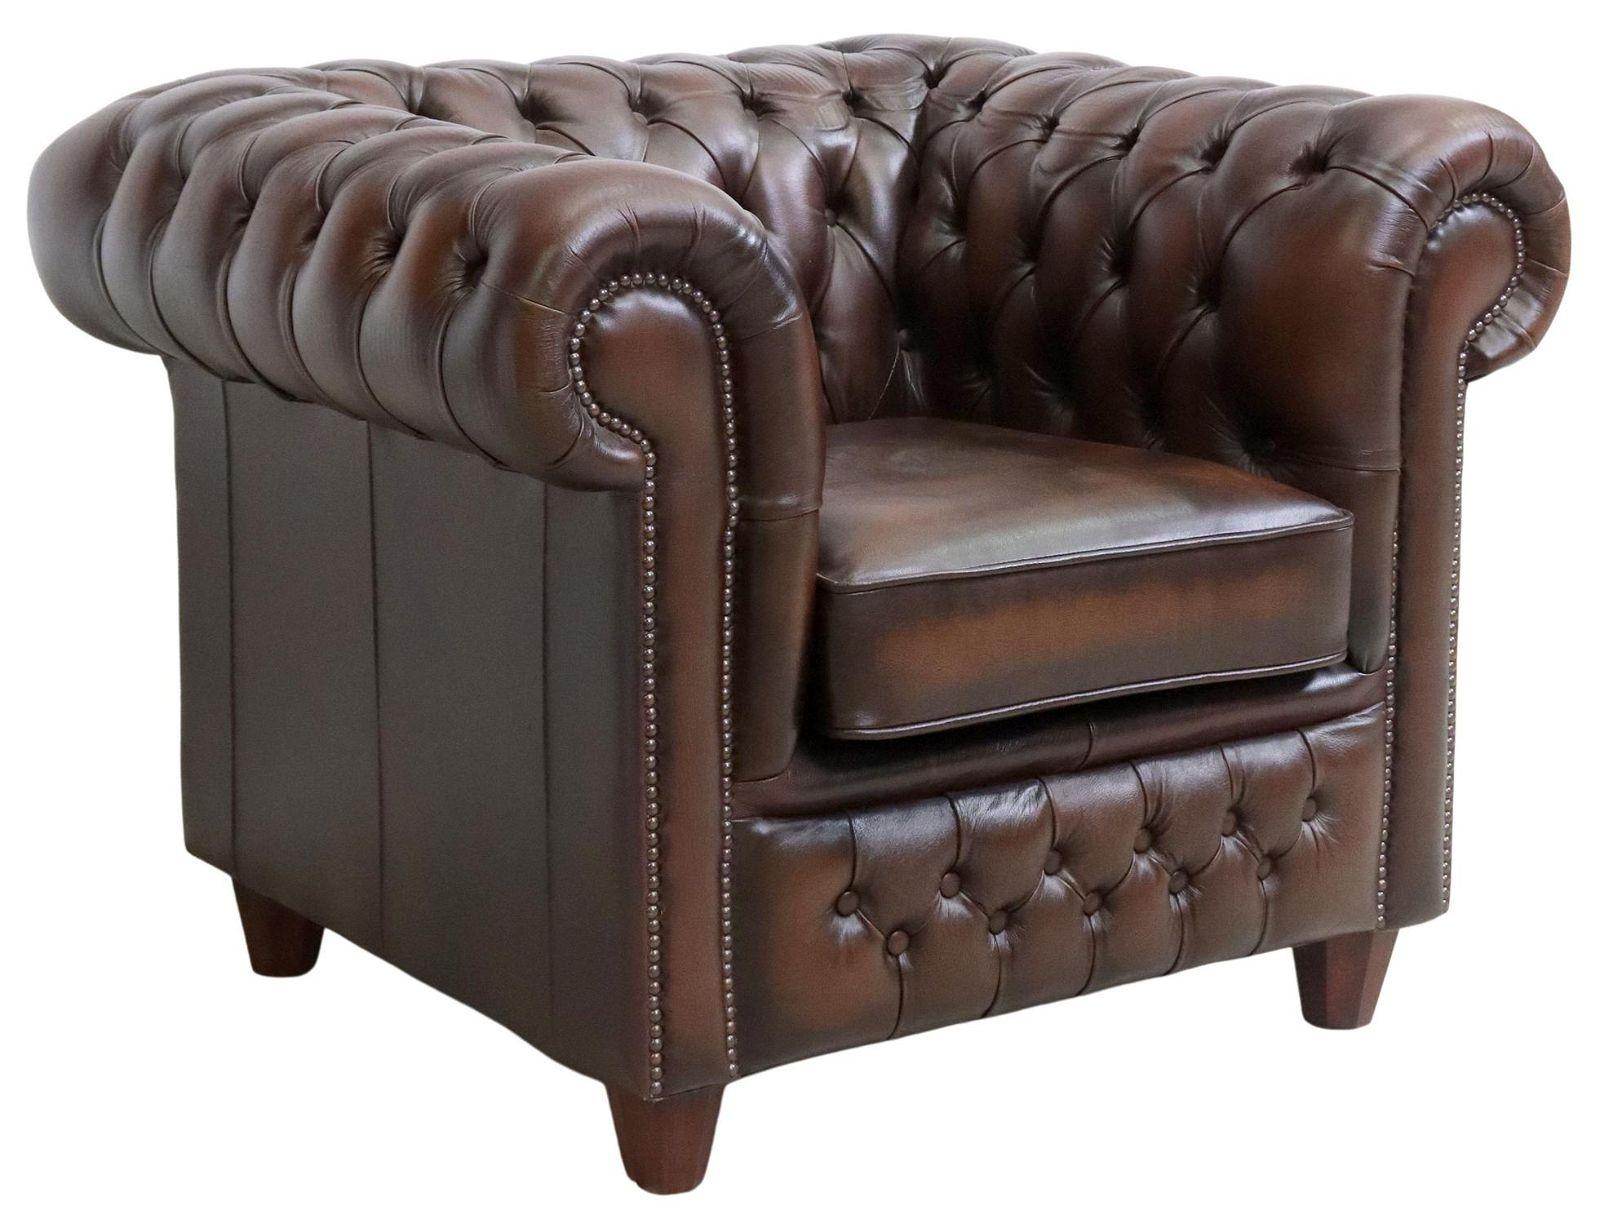 Vintage English Chesterfield club chair, Chesterfield Manufacturing UK, late 20th c.. Club chair in brown button-tufted leather upholstery, rising on tapered legs.

Dimensions
approx 30.5